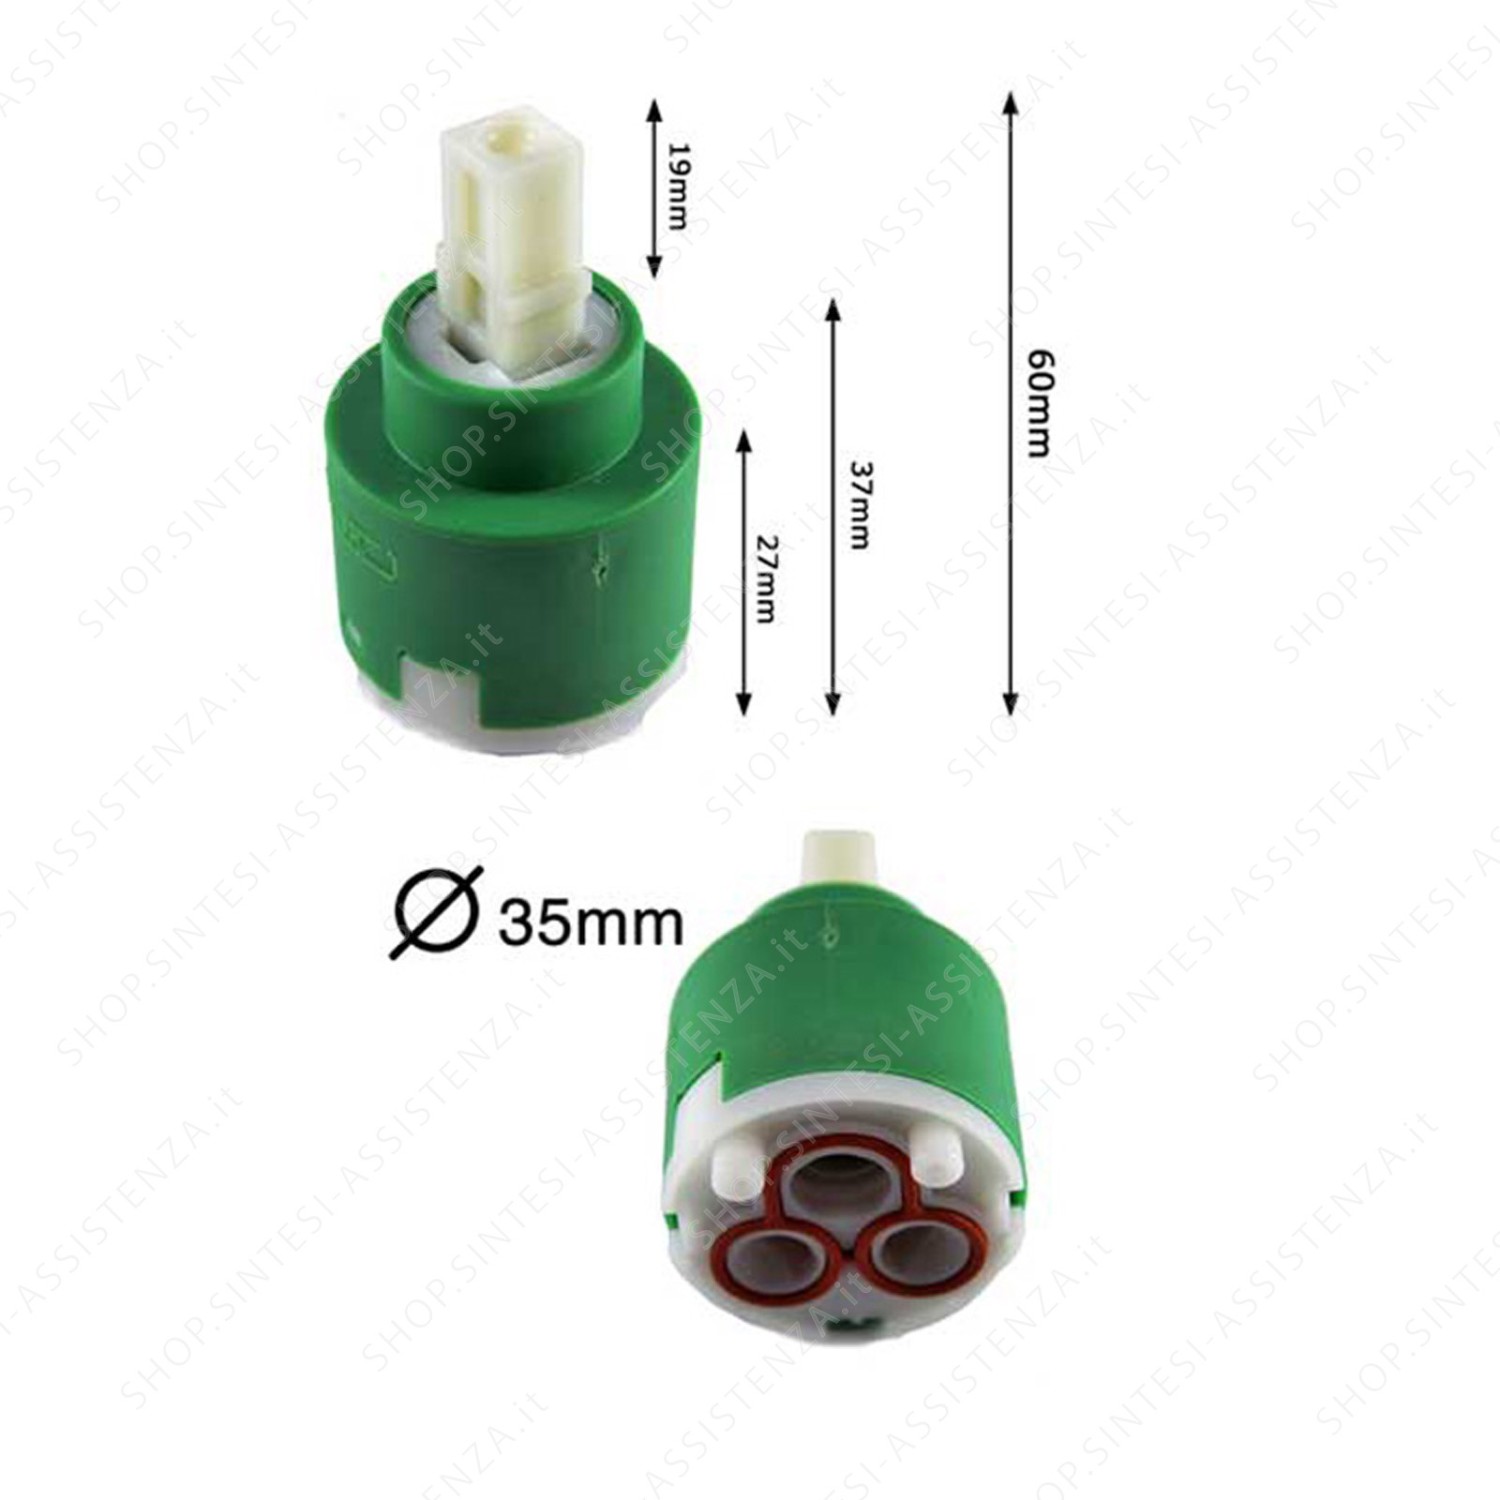 REPLACEMENT CARTRIDGE FOR SINK TAP FRANKE ACTIVE ESPACE THESI 133.0062.440 - 133.0062.440 FR